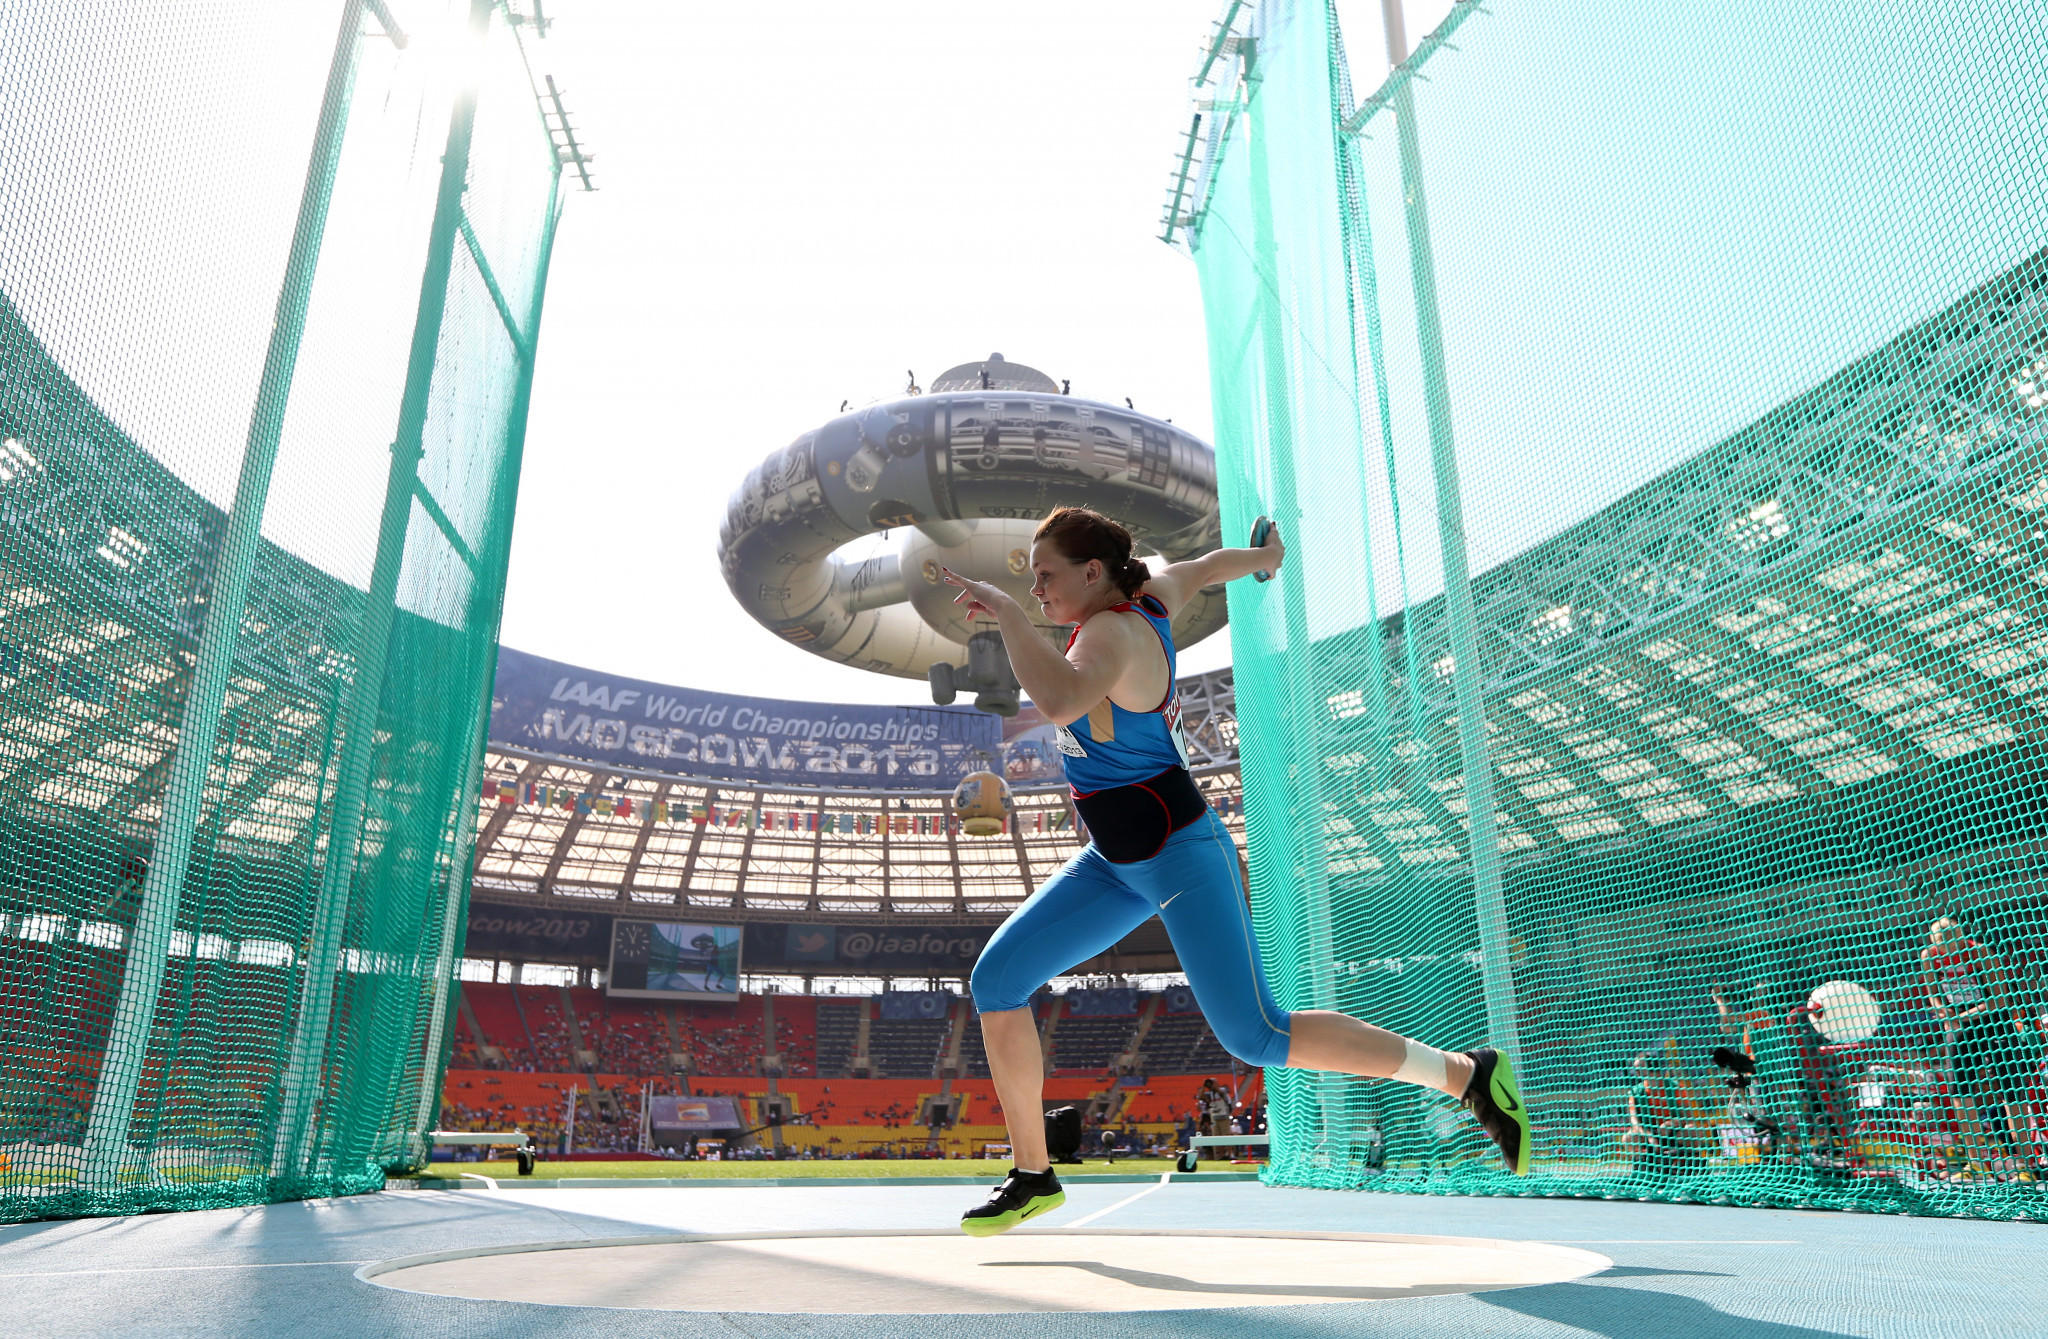 Yekaterina Strokova, a discus thrower who represented Russia at two World Championships, including Moscow in 2013, has been banned by the AIU for four-years ©Getty Images